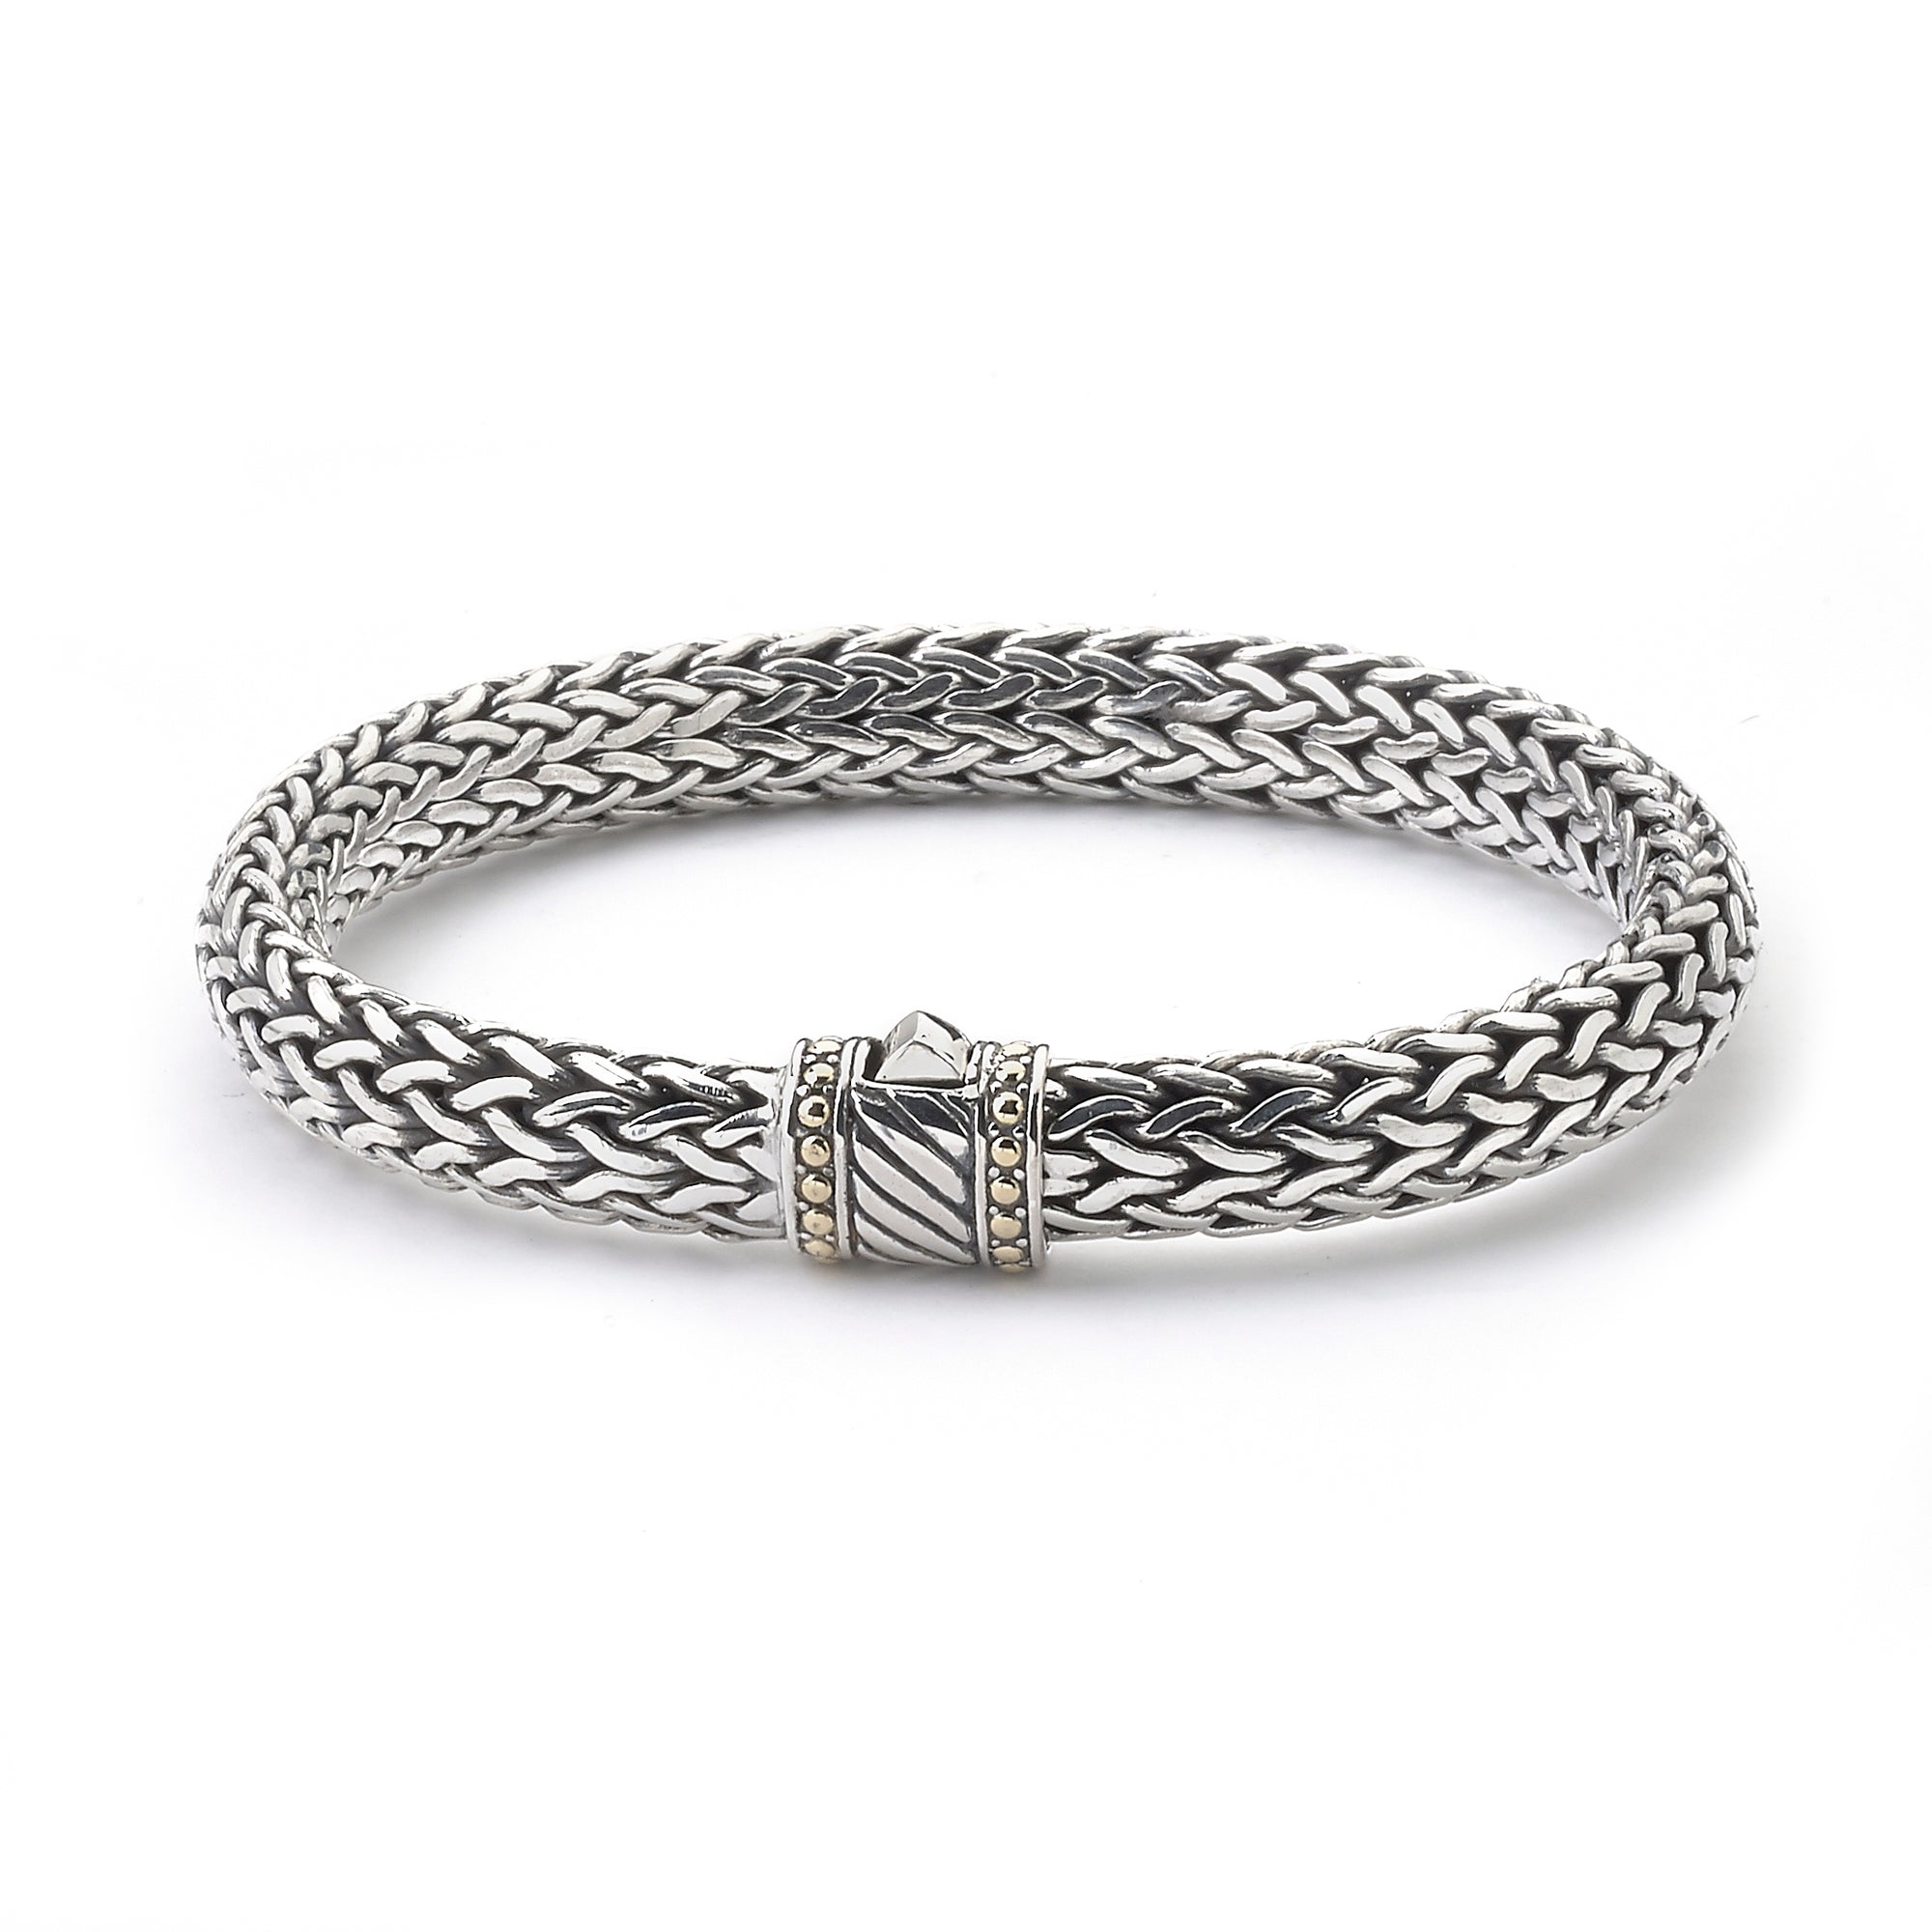 Majesty Palm Men’s Bracelet available at Talisman Collection Fine Jewelers in El Dorado Hills, CA and online. Specs: Majesty Palm Bracelet is crafted in Sterling Silver and features a diagonal line clasp accented with 18k gold. 8.0". 